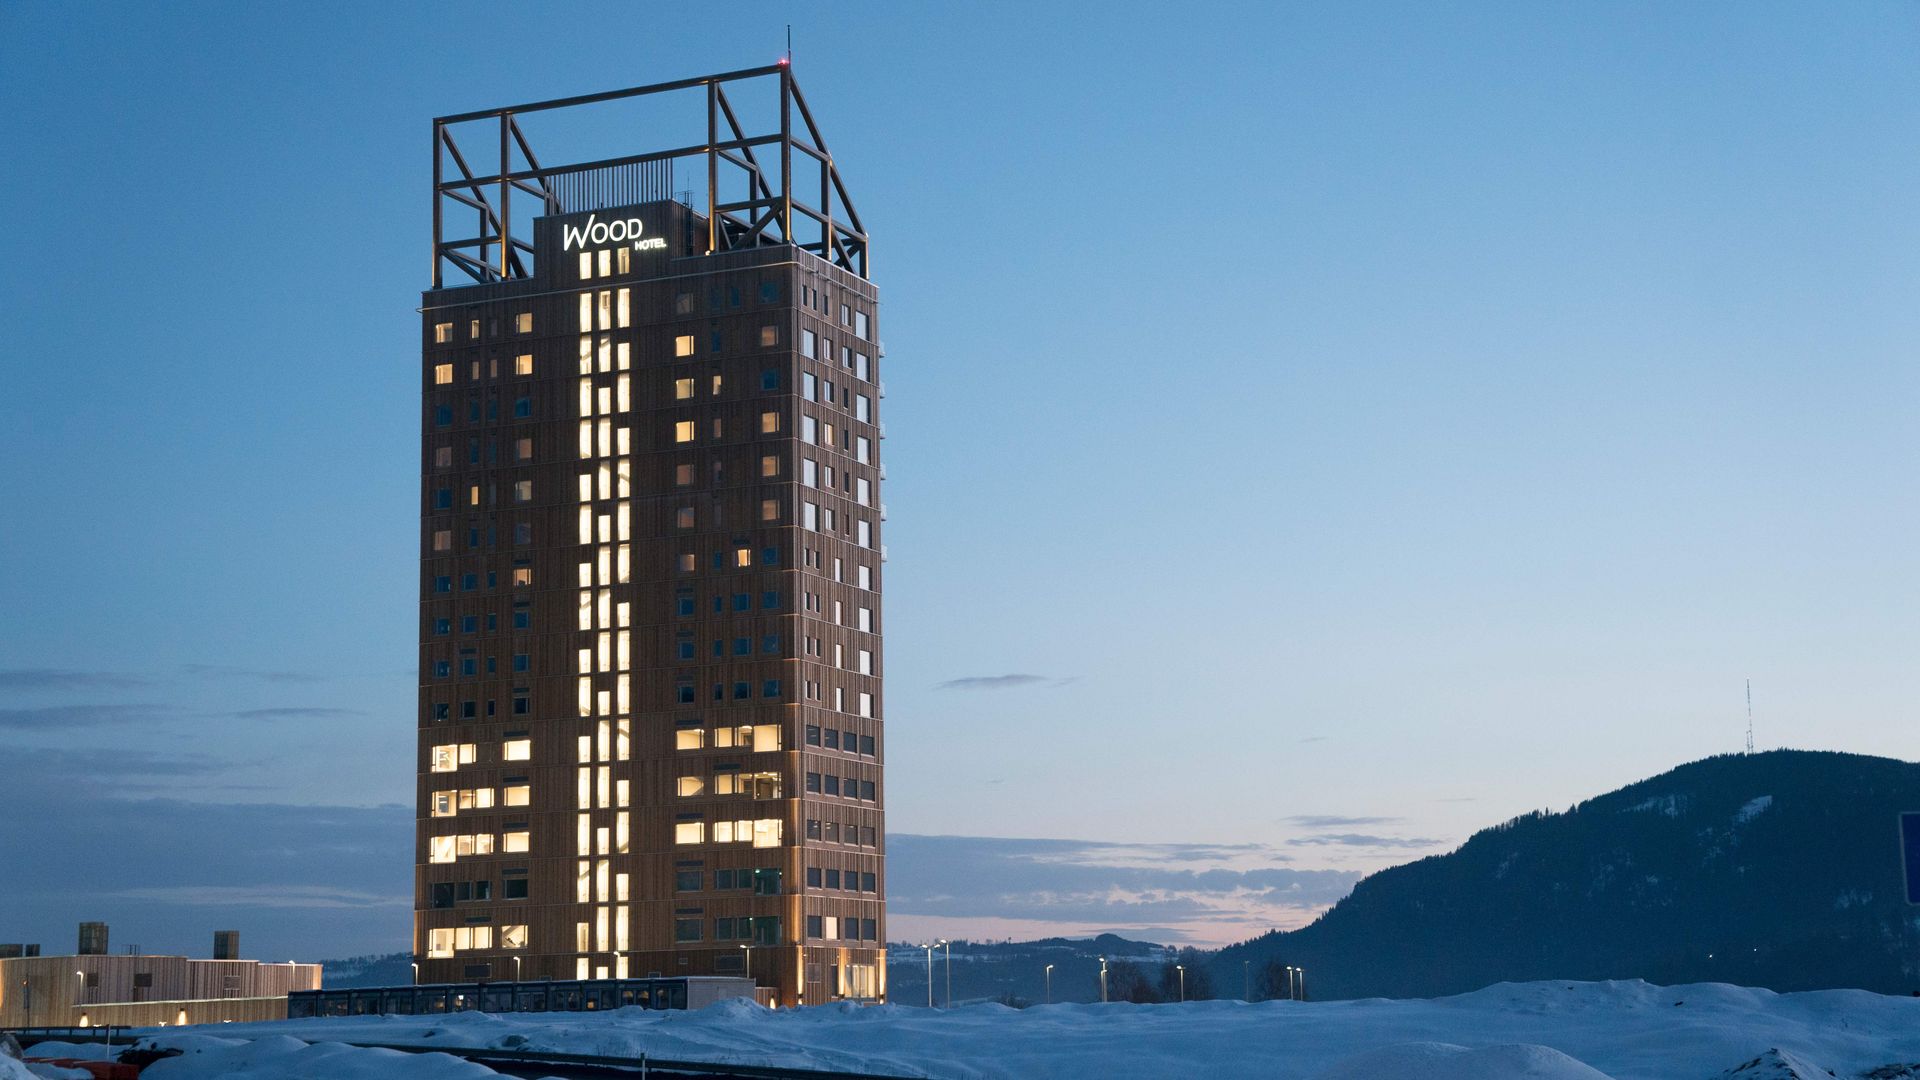 The world's tallest house built of wood 'Mjos tower' 